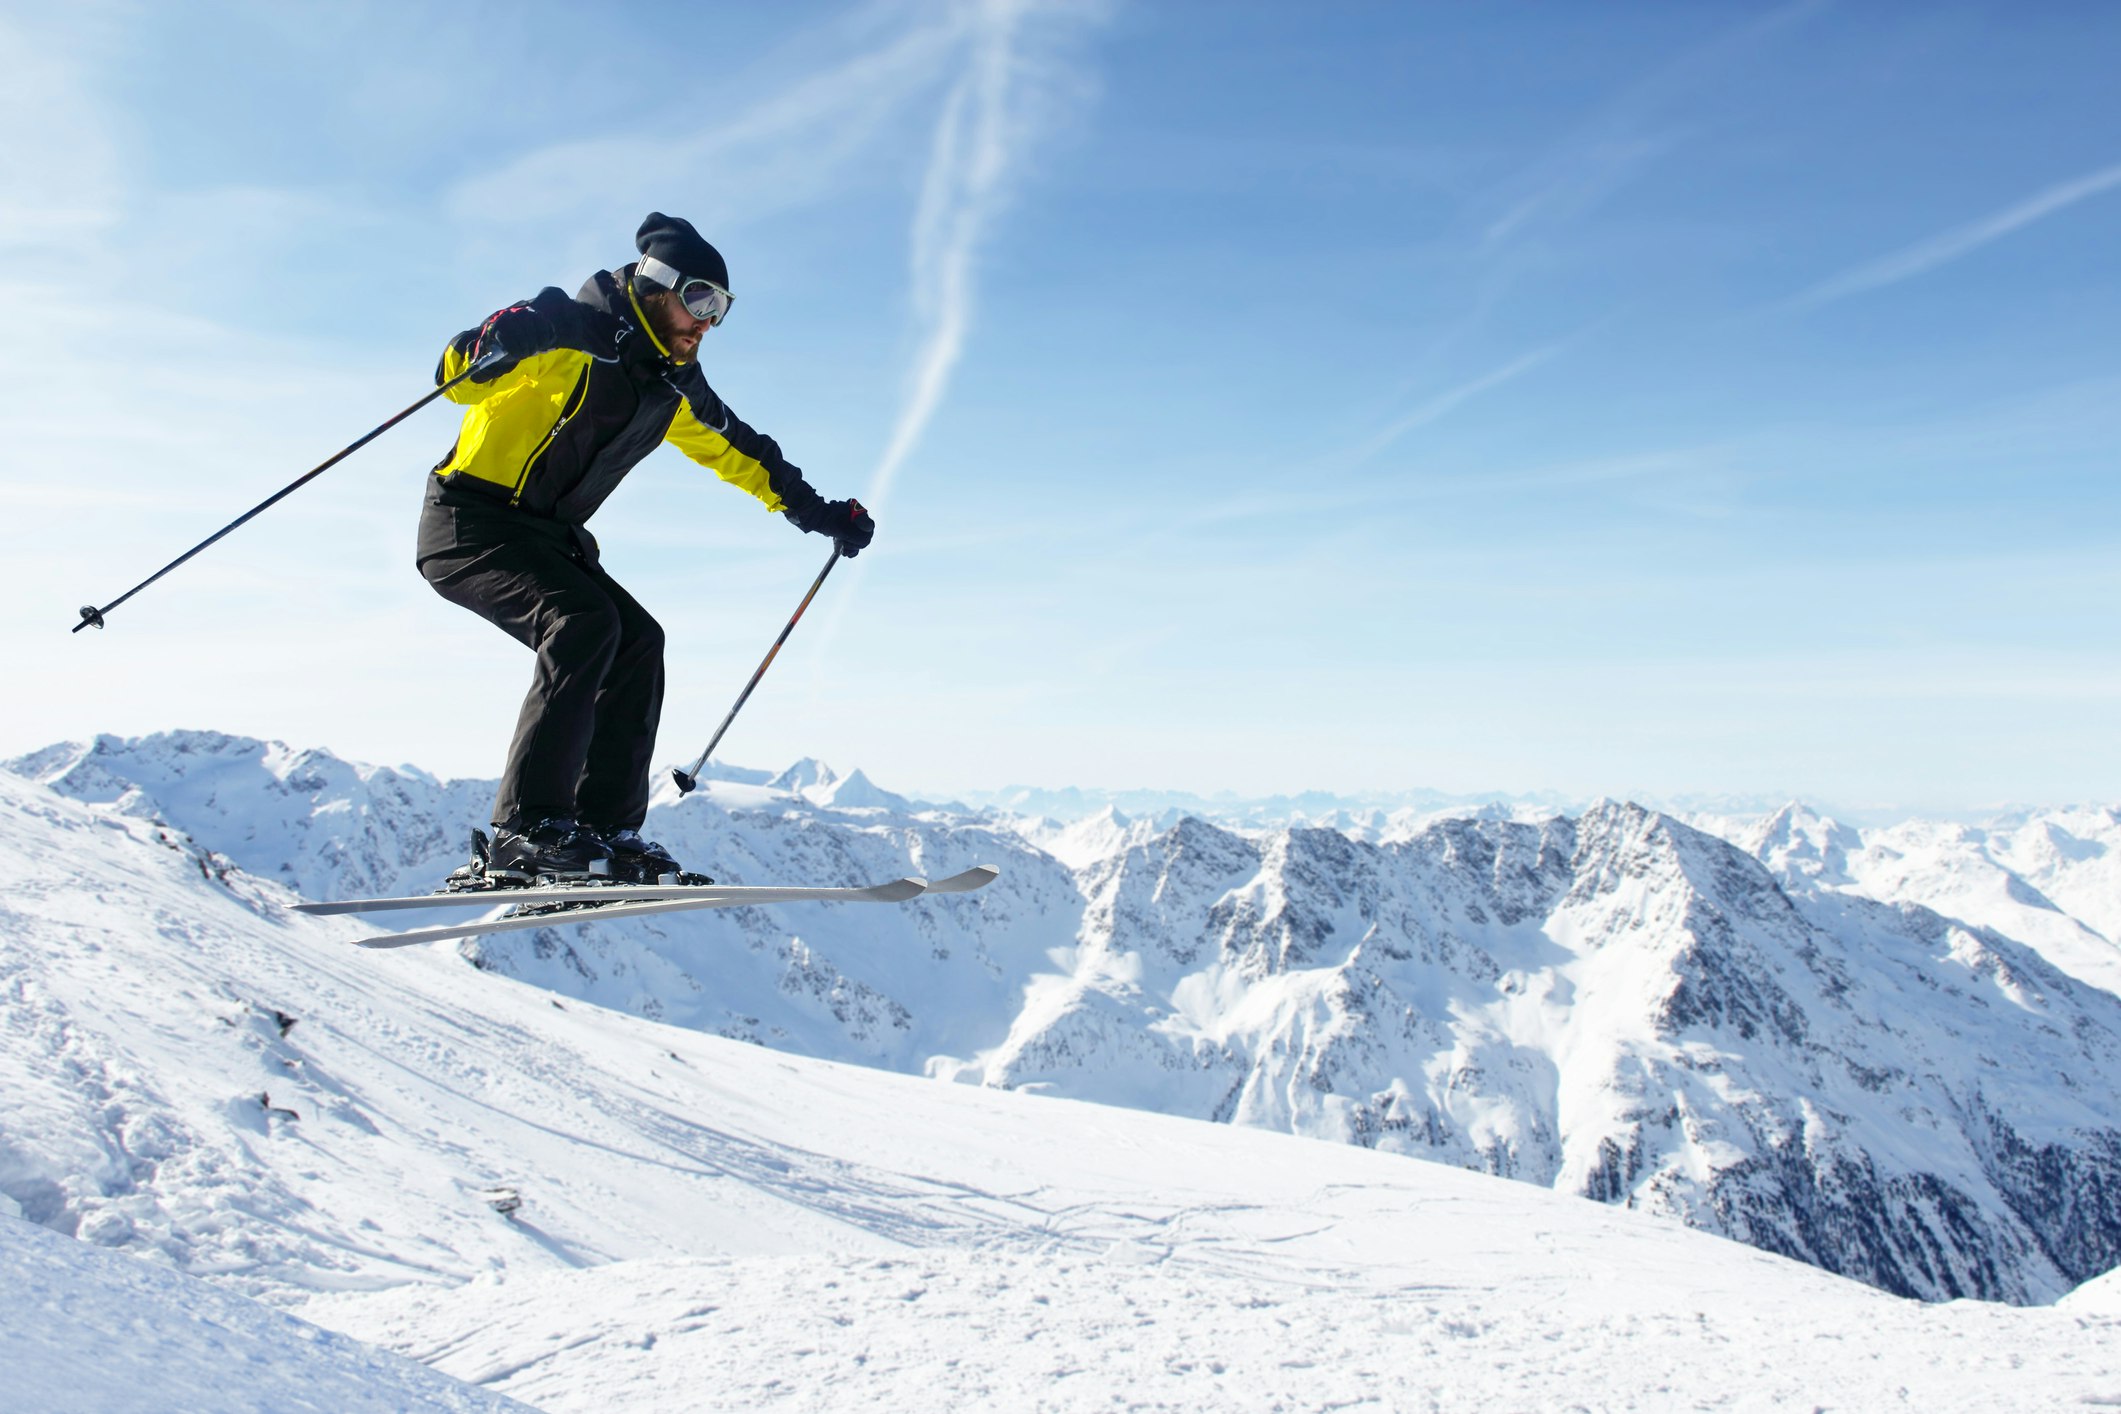 A skier jumping with alpine high mountains behind him